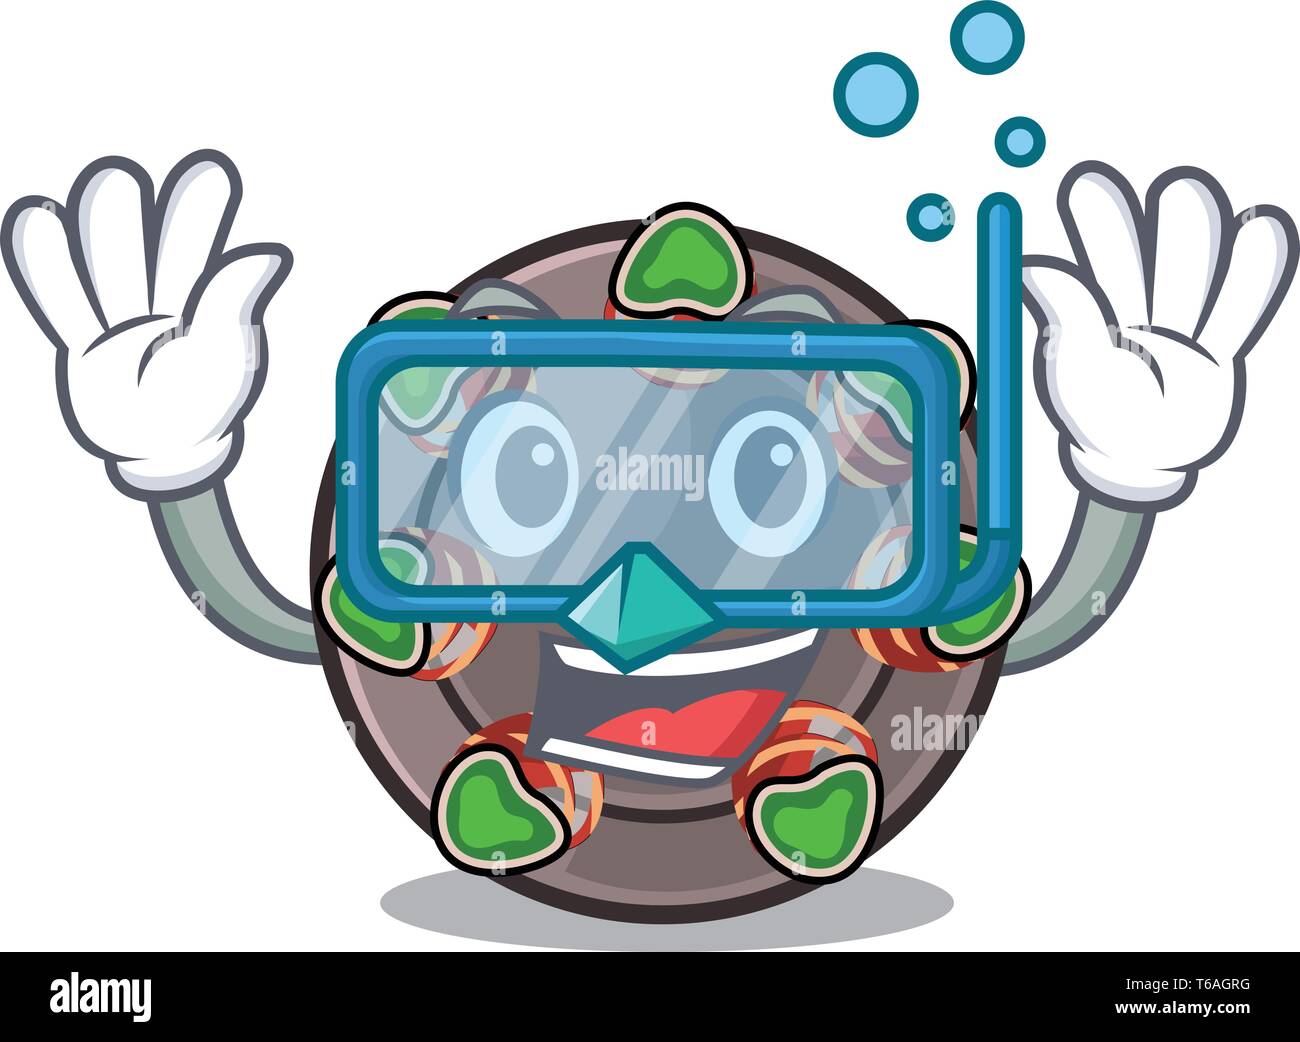 Diving escargot is presented on character plates Stock Vector